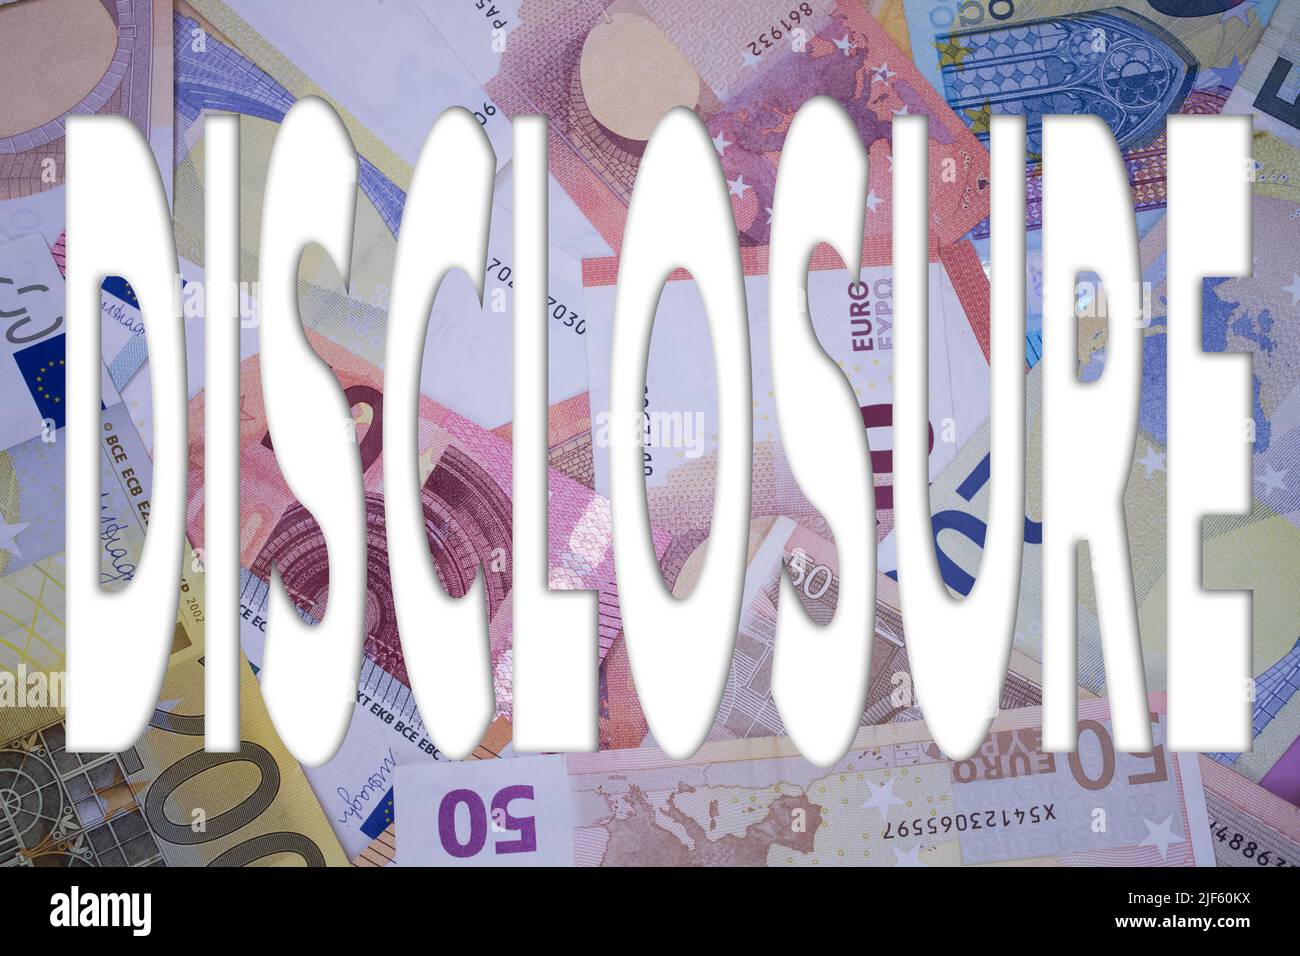 Disclosure word with money. Paper currency background with different banknotes. Stock Photo